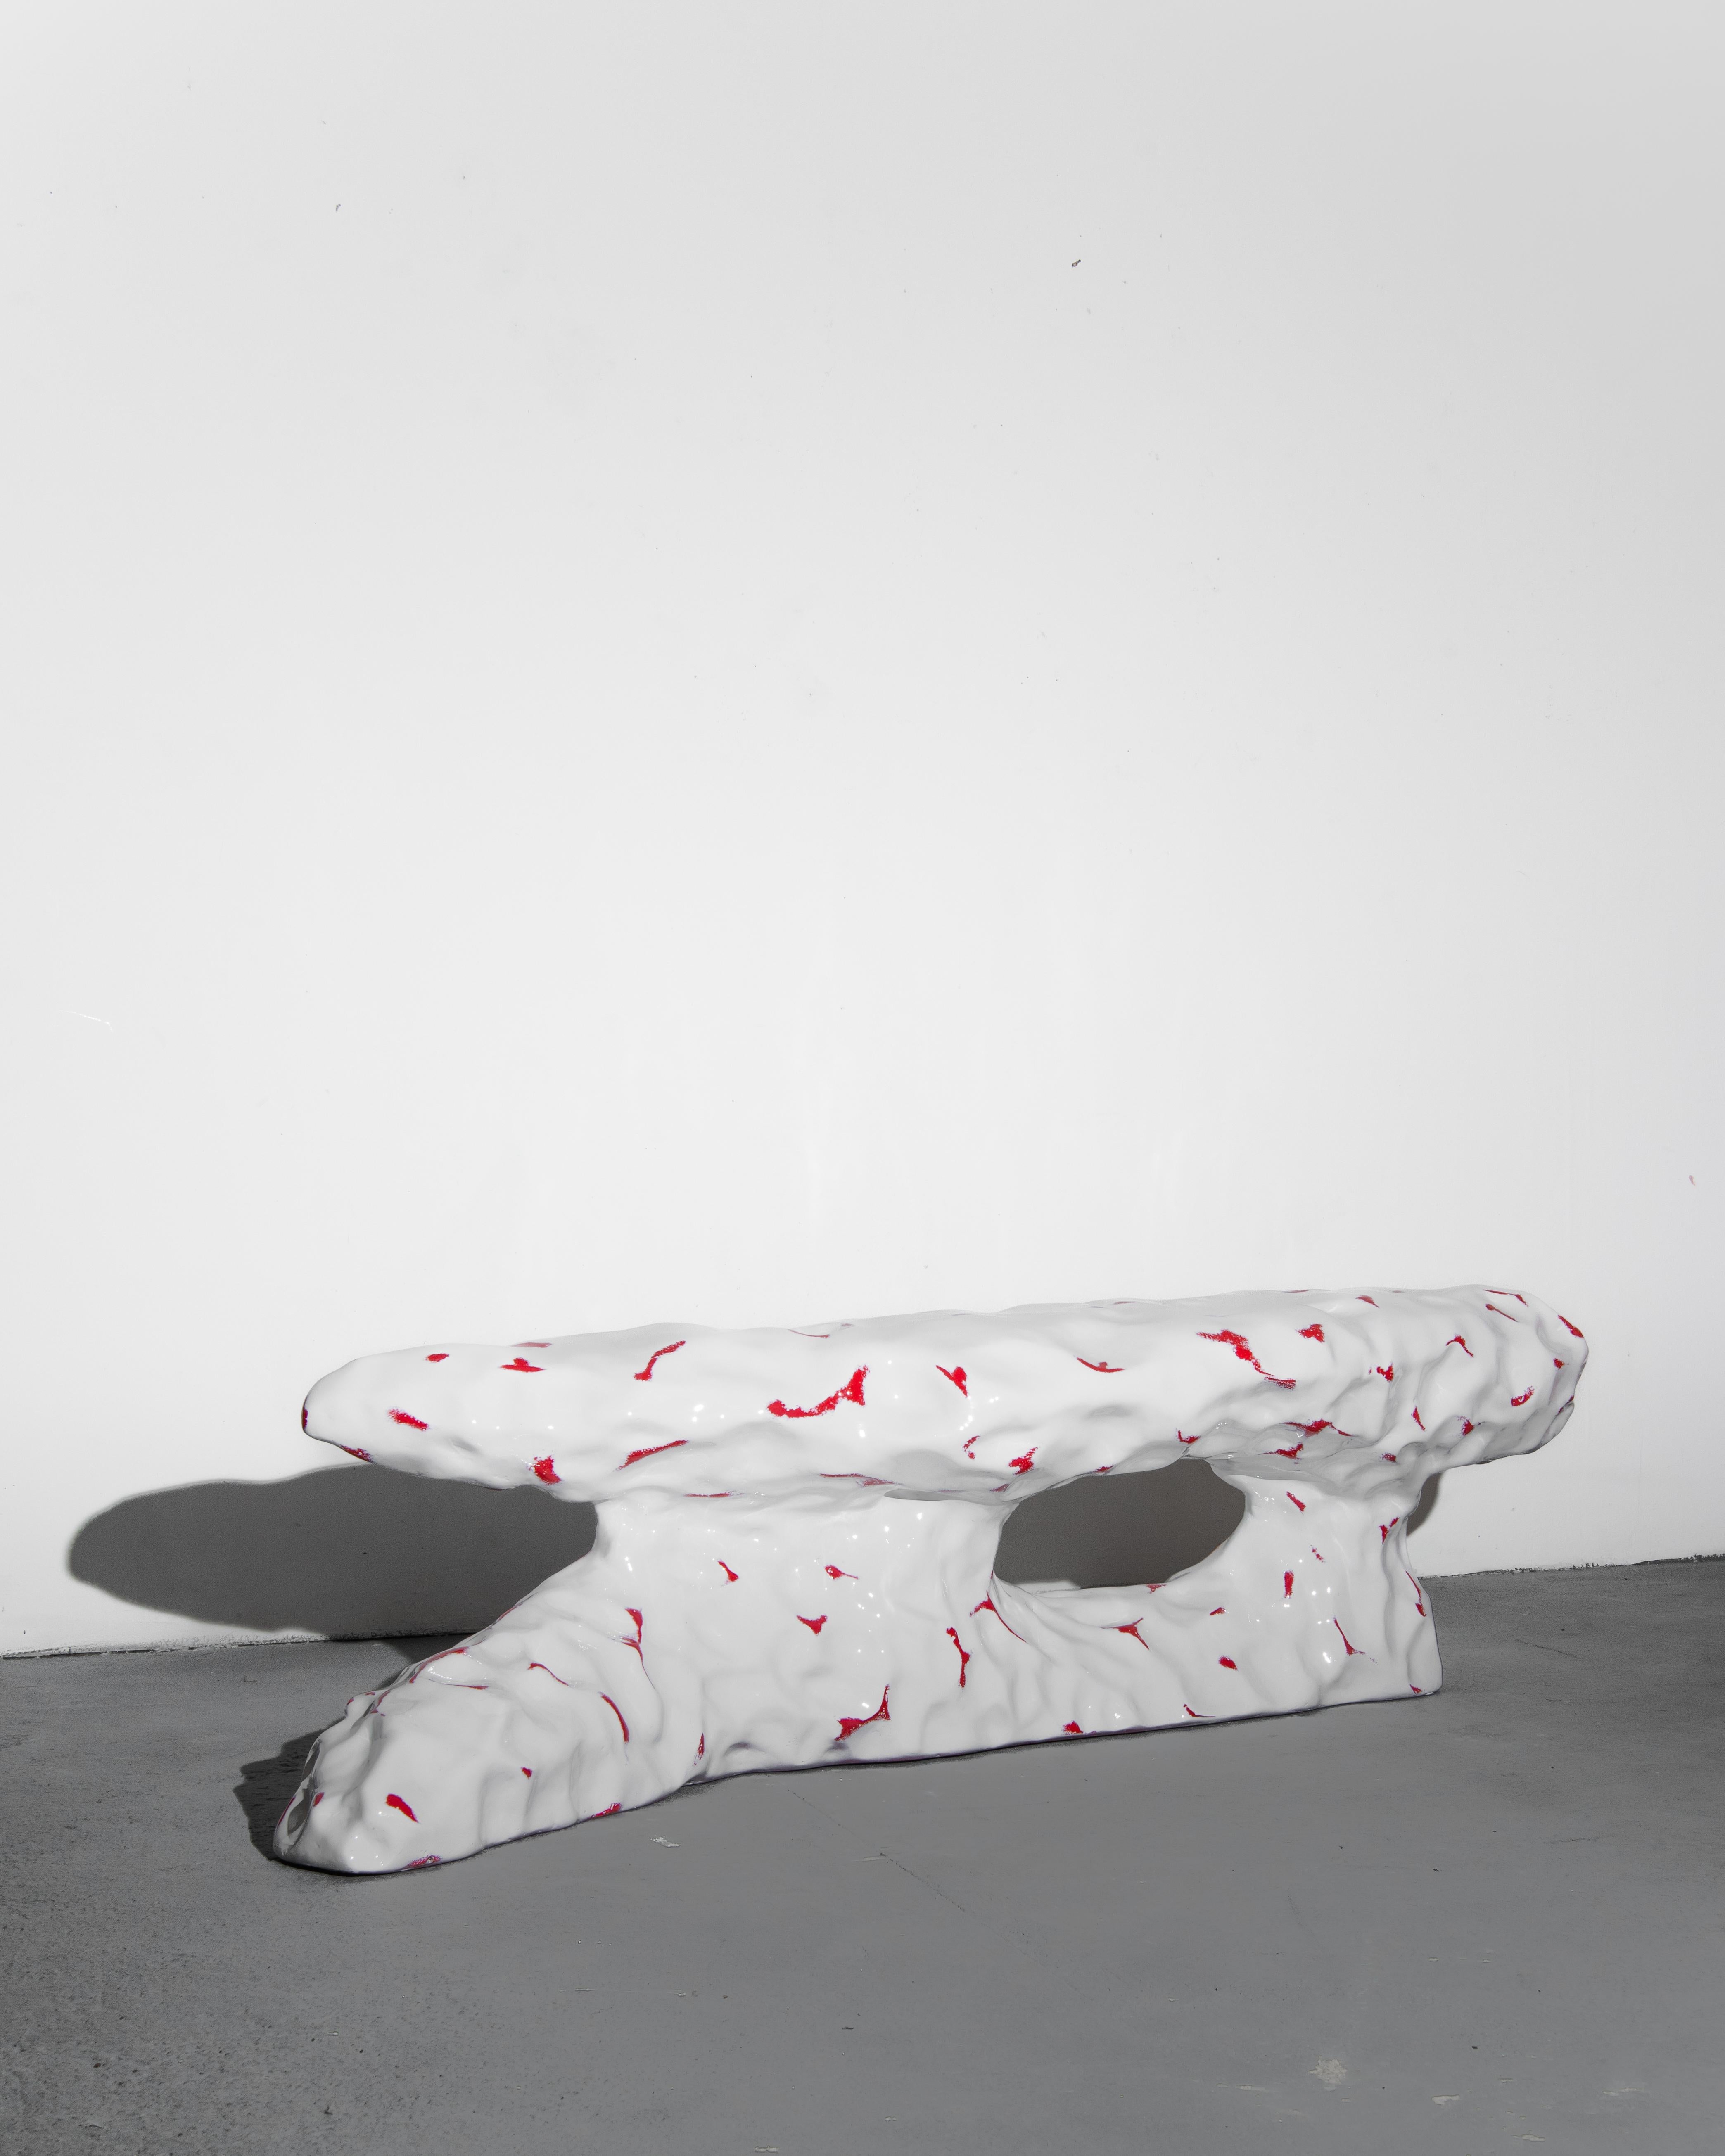 Piedra bench by Alberto Vitelio
Material: Fiberglass, resin, polyurethane paint.
Dimensions: W 167 x H 46 x D 40 cm.

Alberto Vitelio was born in Santiago de Chile in 1990, in a newly installed democracy after 17 years of military-civic